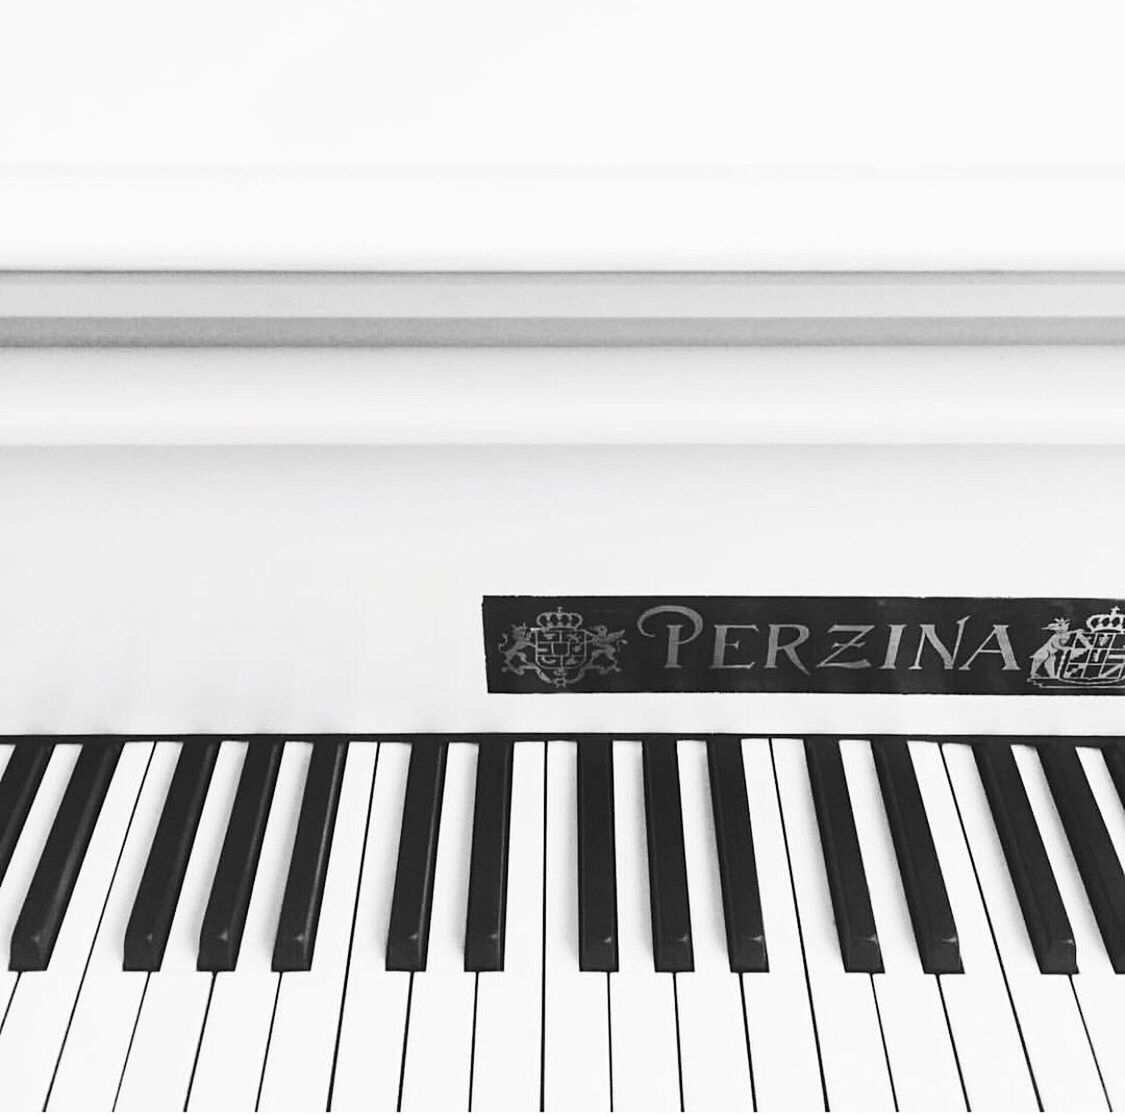 piano, musical instrument, musical equipment, piano key, music, arts culture and entertainment, no people, indoors, close-up, keyboard, high angle view, keyboard instrument, pattern, white color, black color, absence, simplicity, copy space, striped